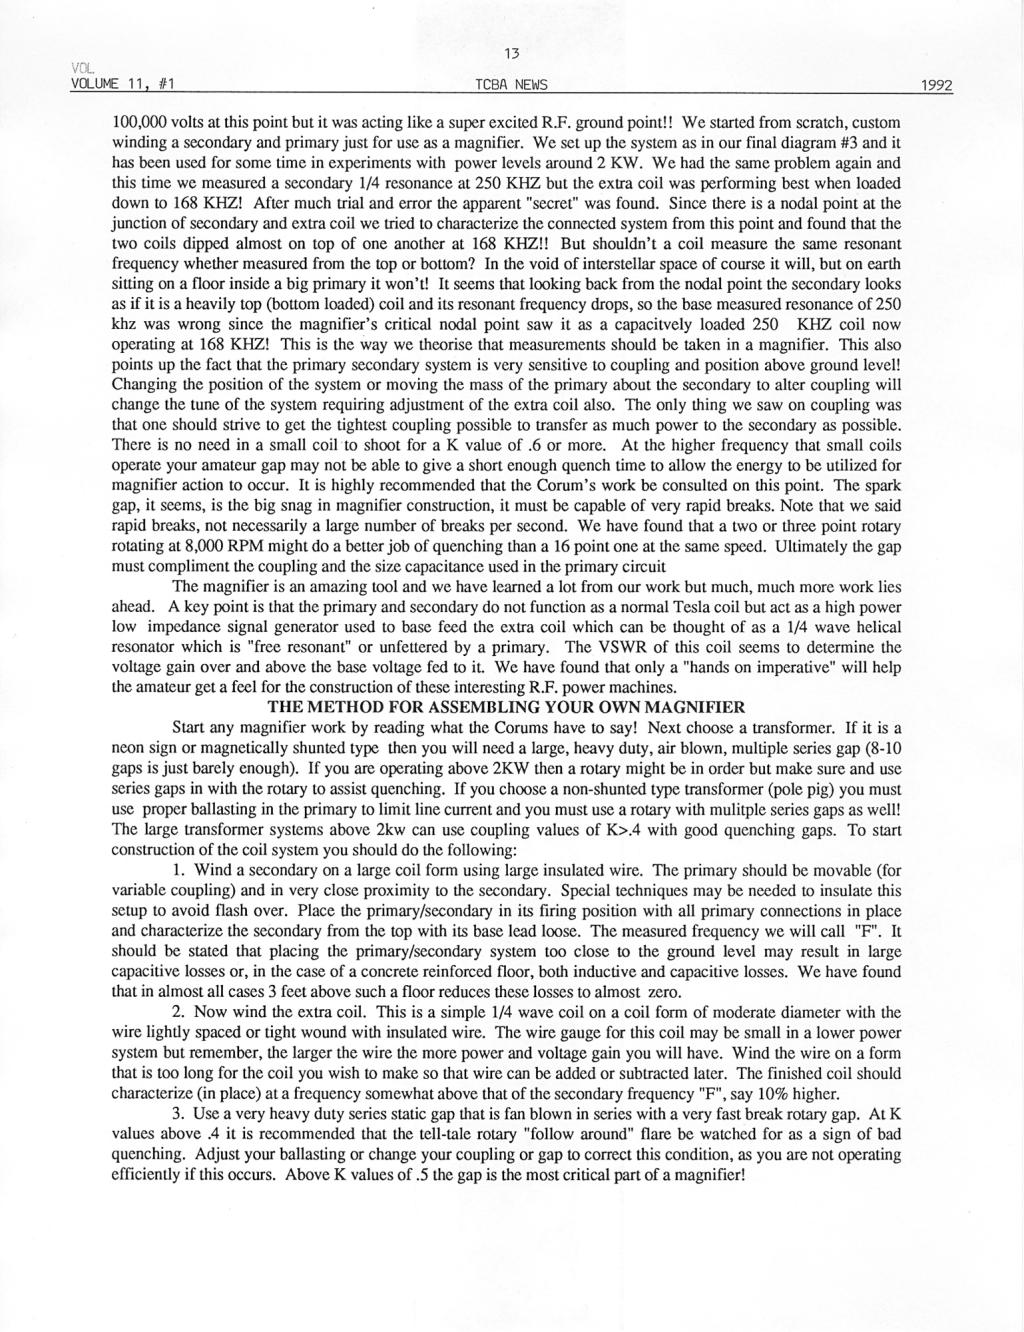 TCBA Volume 11 - Issue 1 - Page 13 of 18